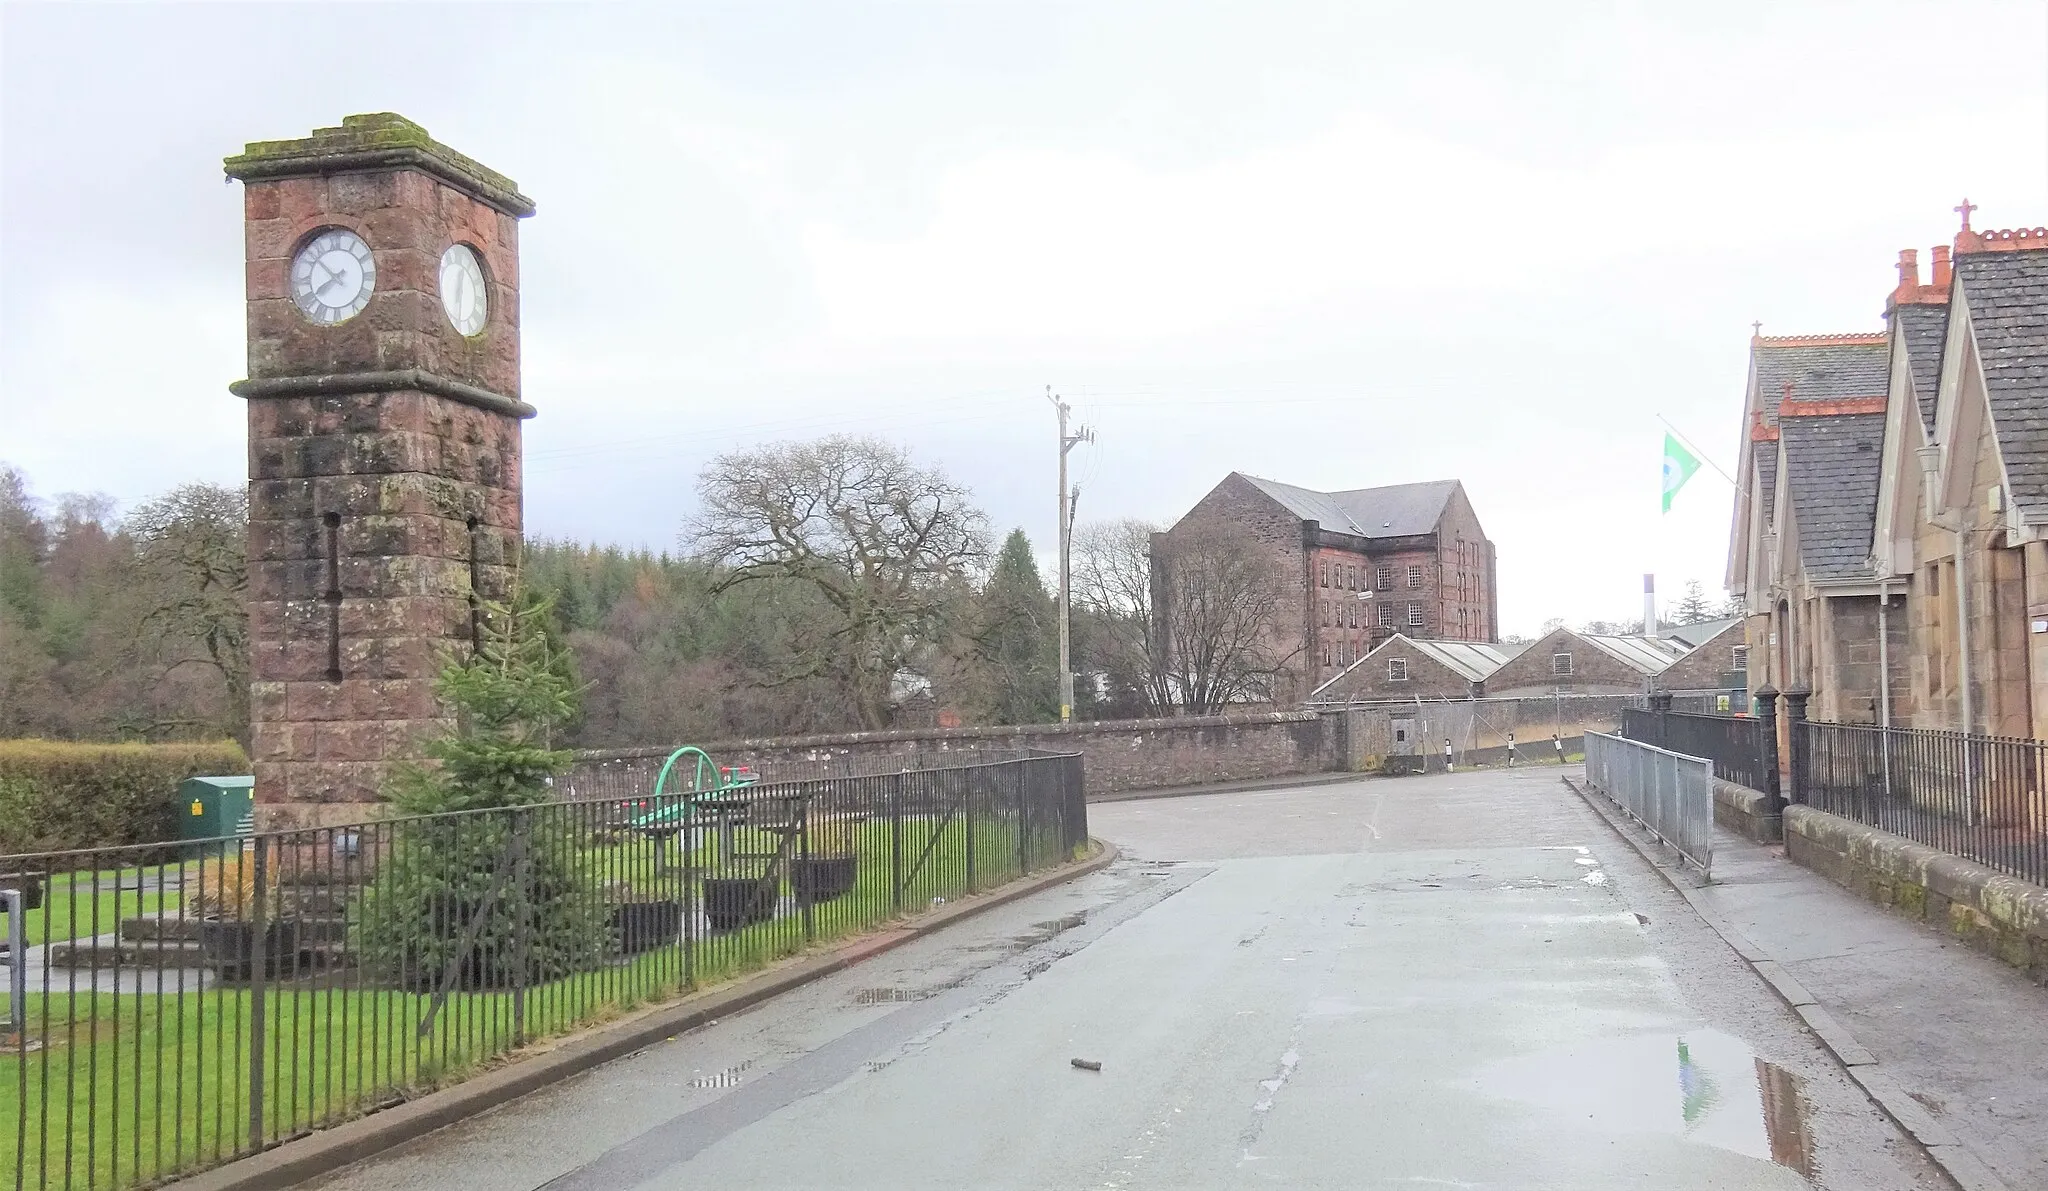 Photo showing: The Deanston Memorial Clock, village and distillery, Stirling.